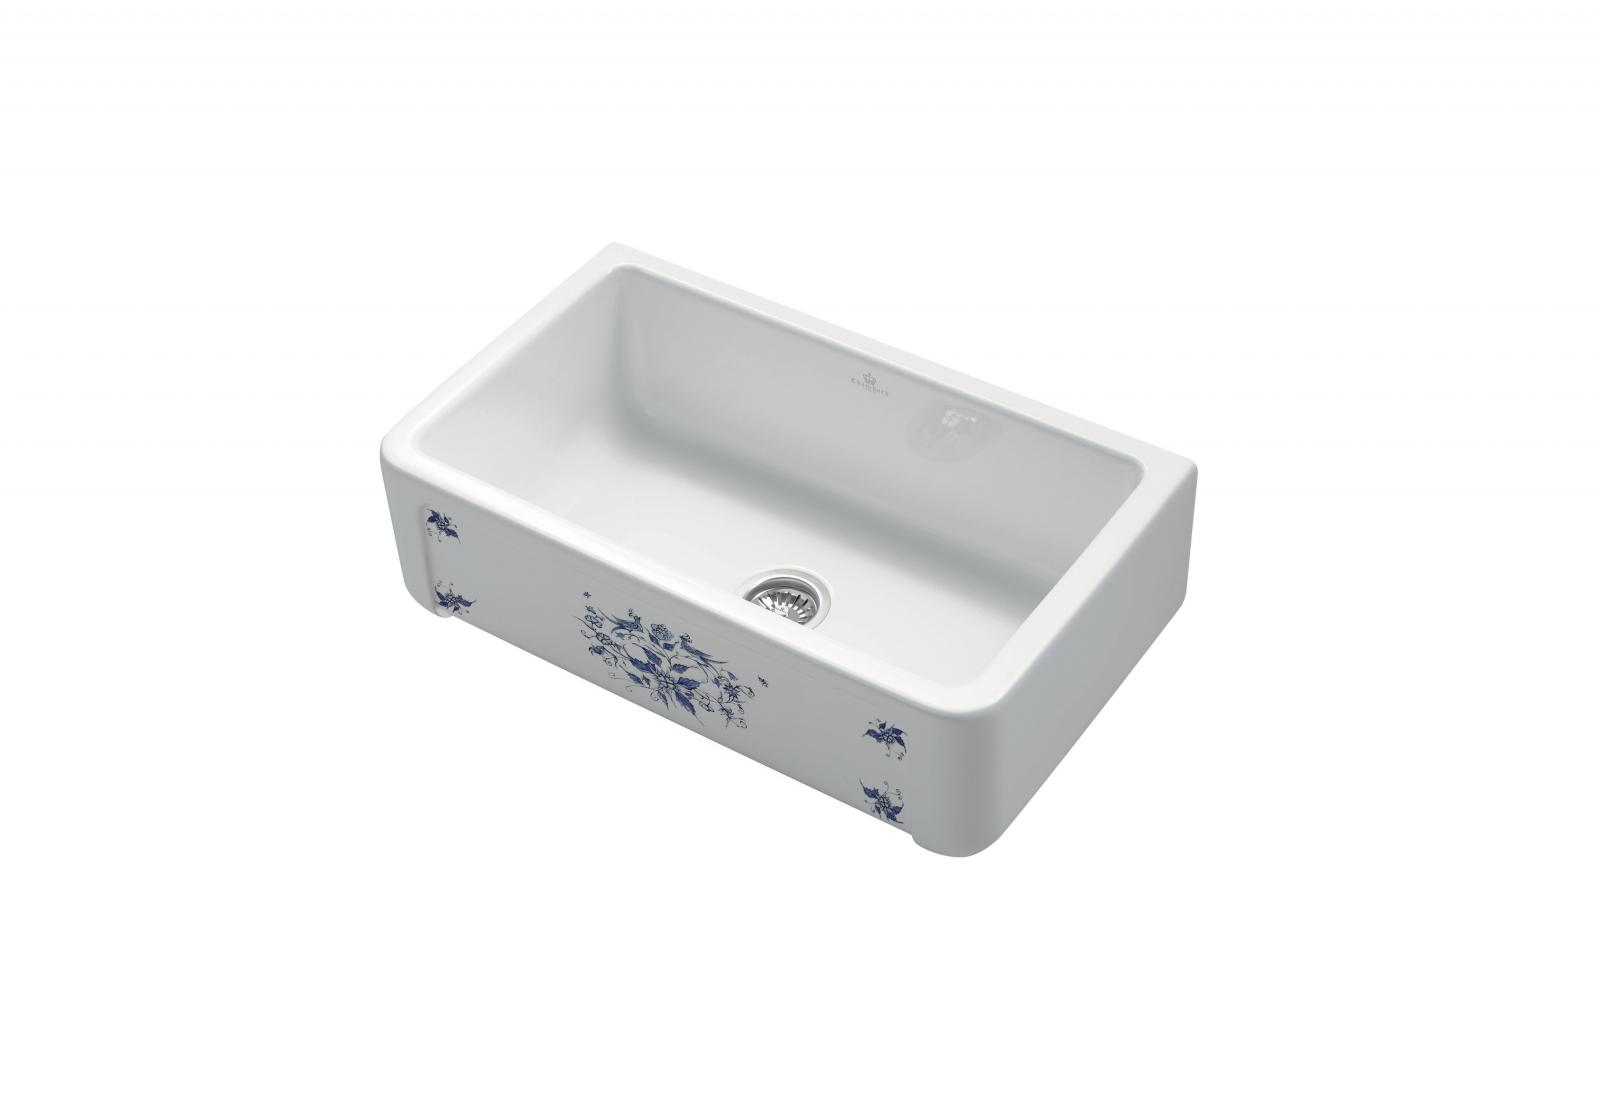 High-quality sink Henri II Le Grand Moustiers - single bowl, ceramic ambience